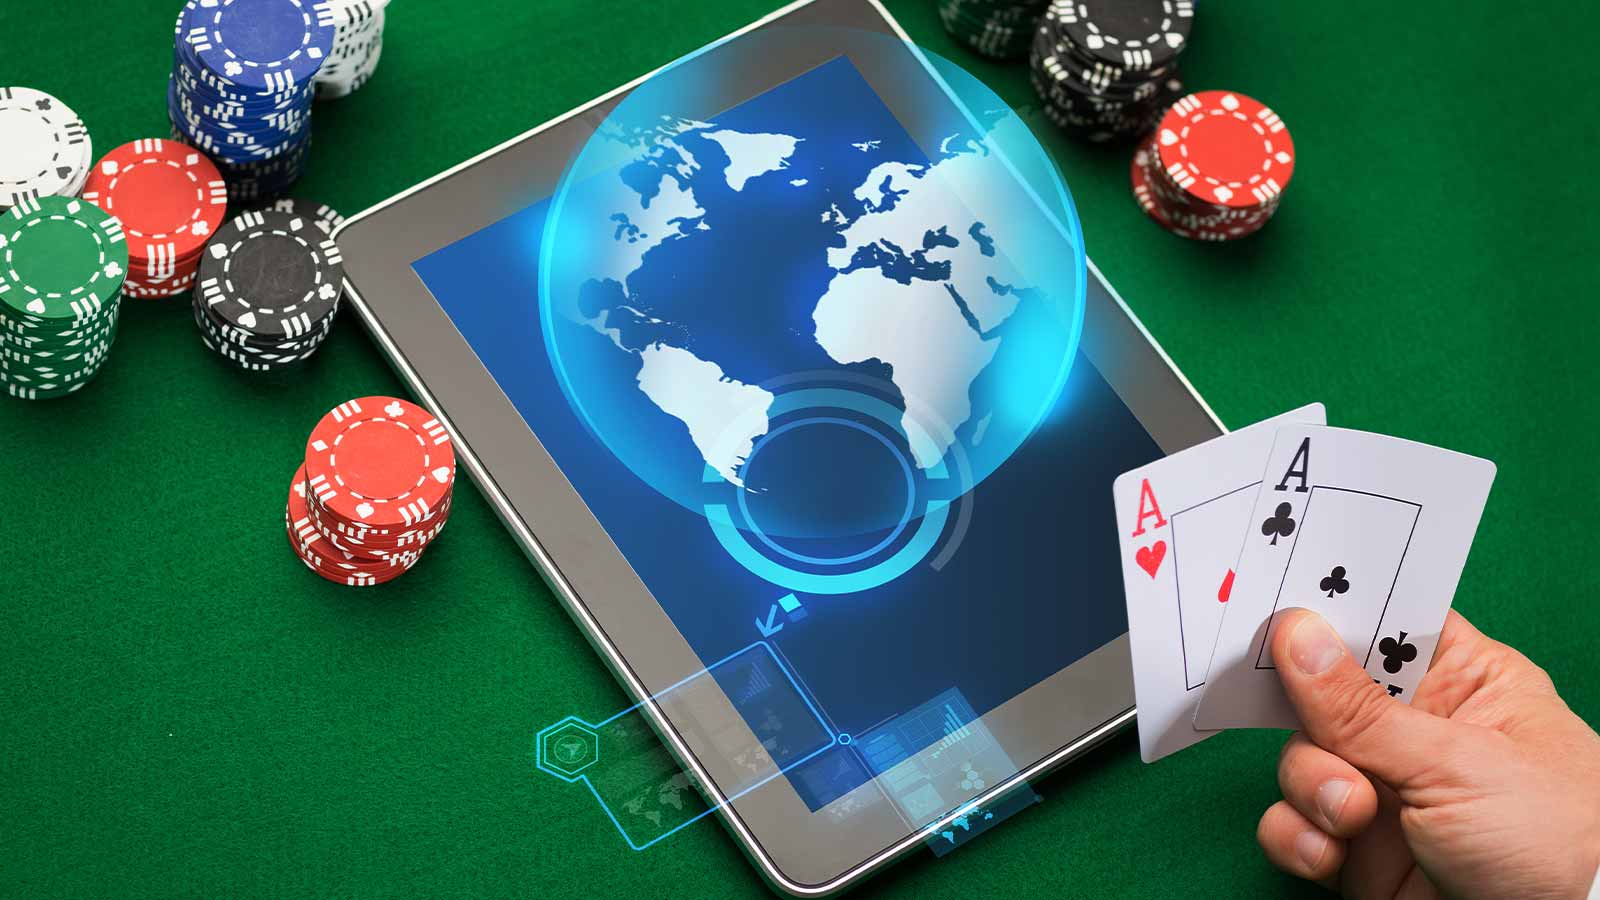 Redefining Risk: The Evolution and Ethics of Online Gambling